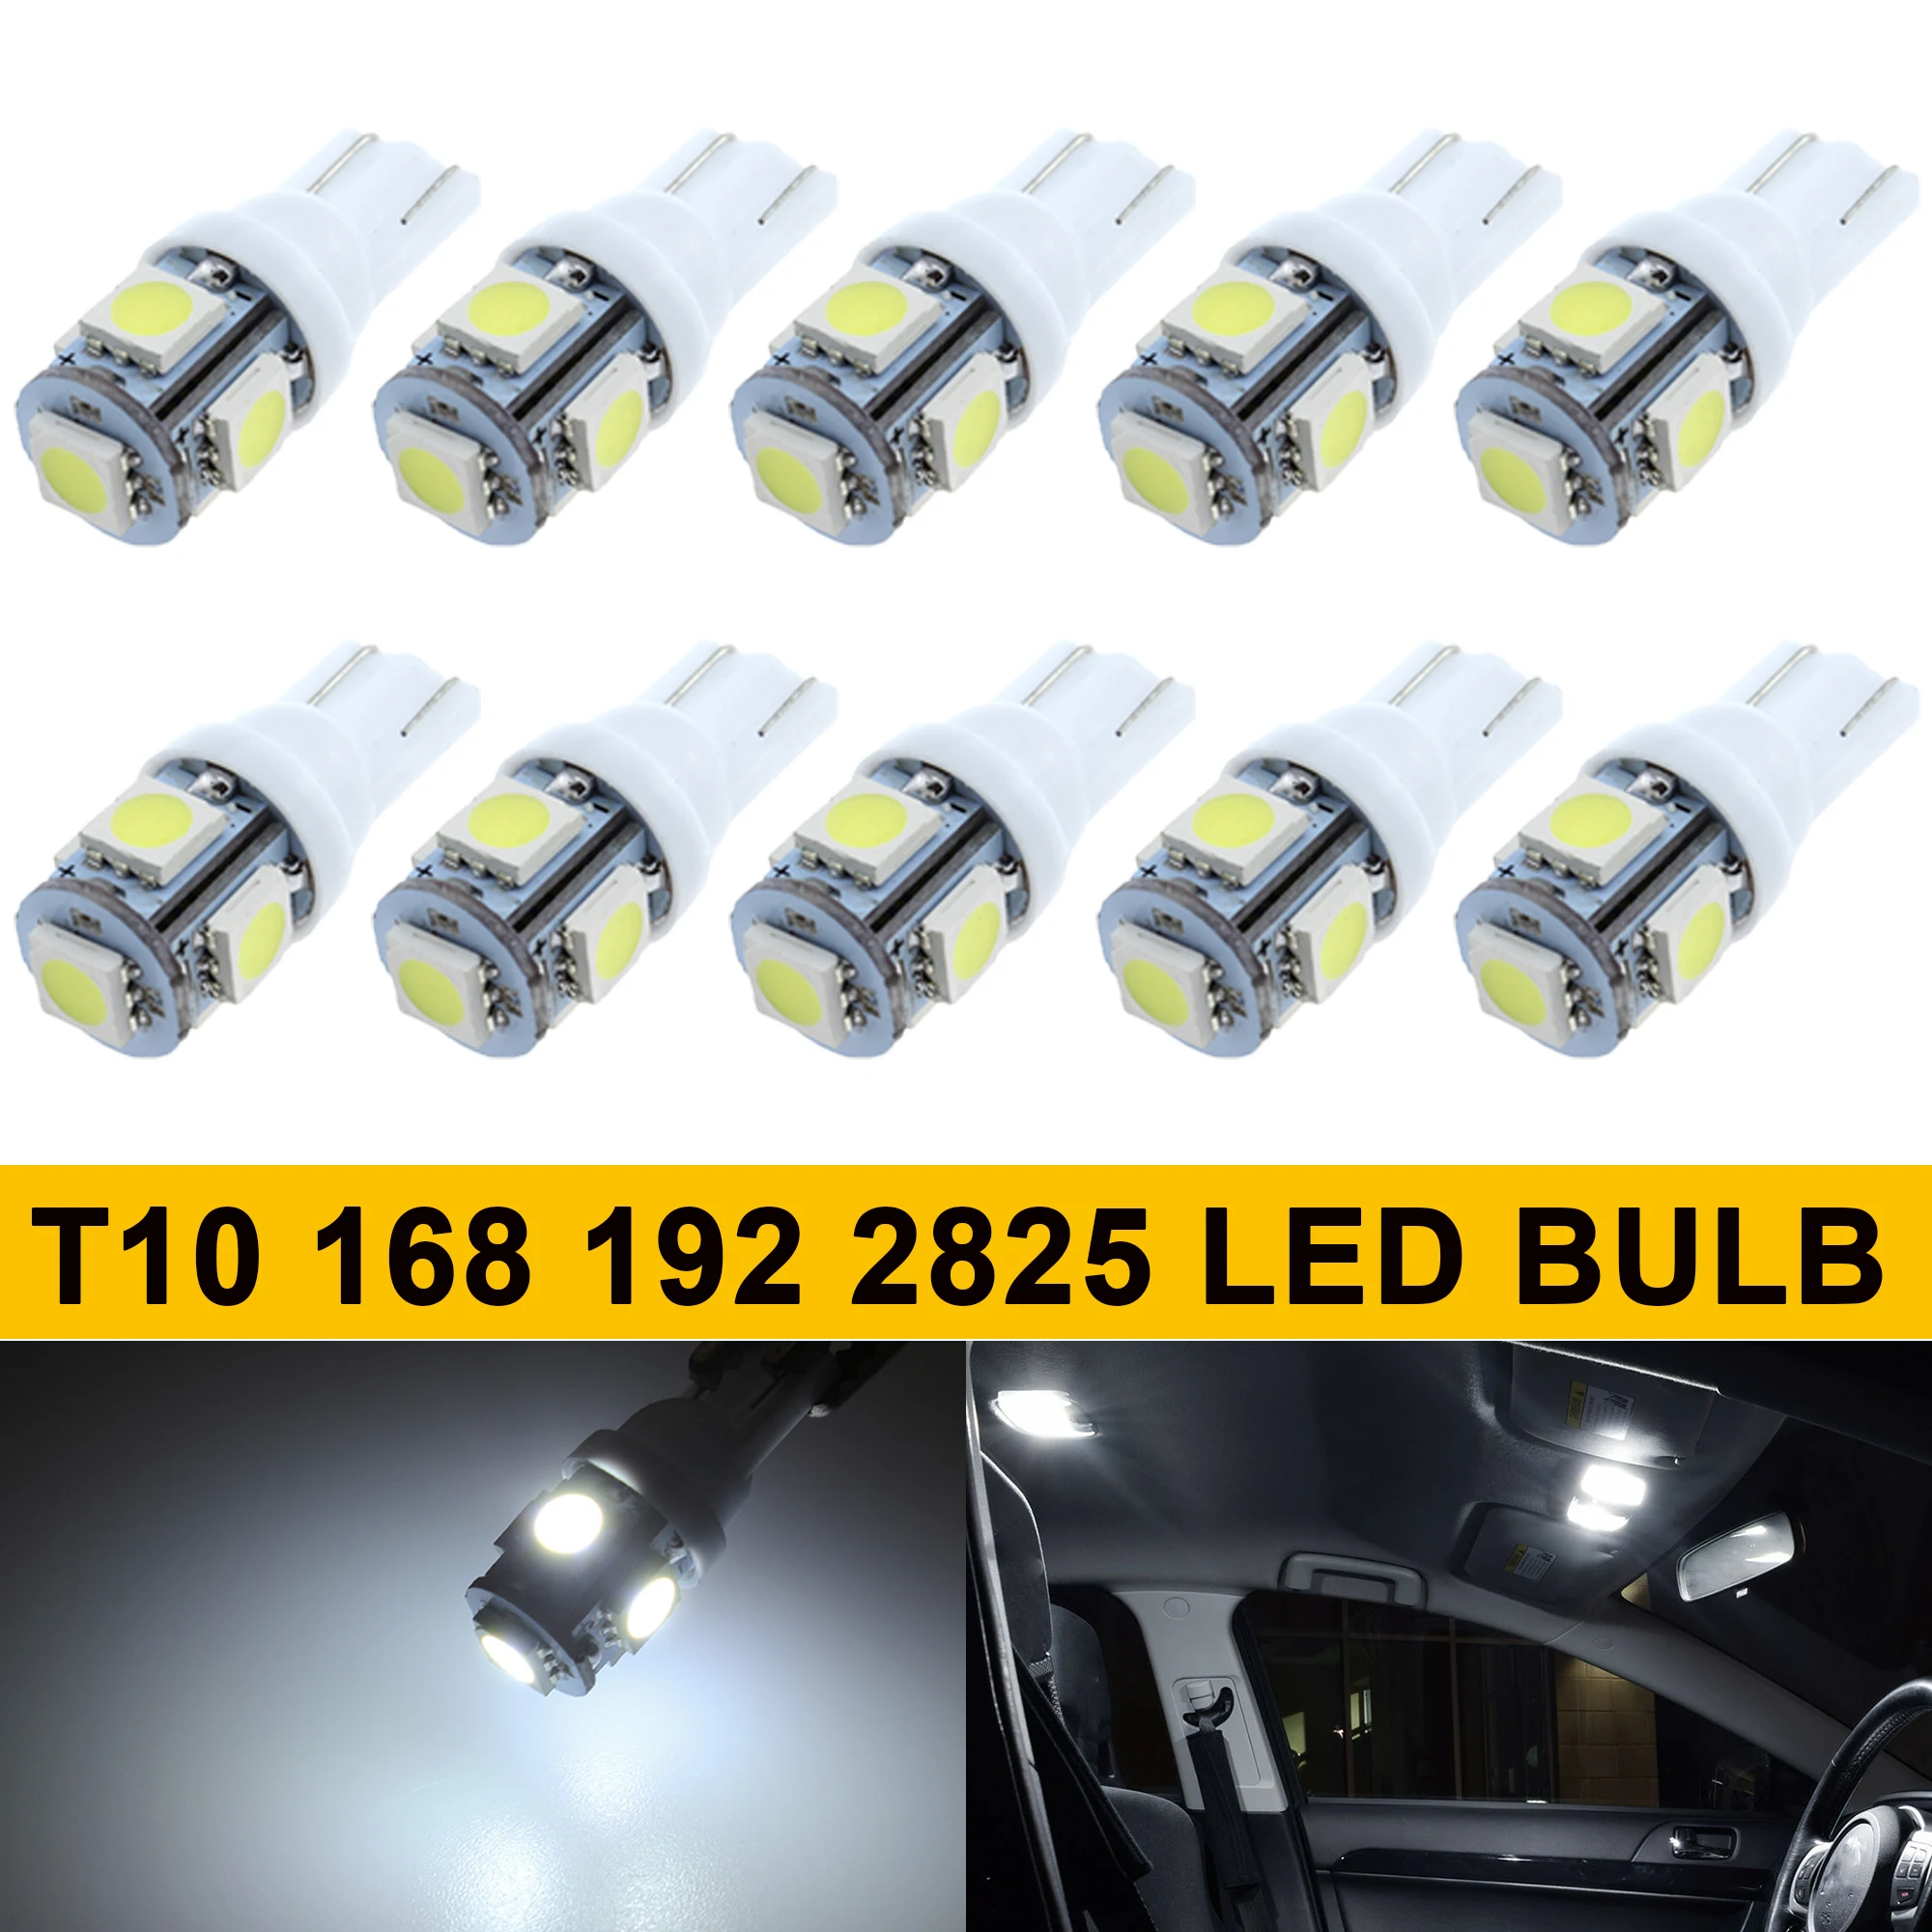 

Winetis 10X 194 LED Bulb 6000K White 168 T10 2825 5SMD Replacement Bulbs for Interior Dome Map Door Courtesy License Plate Light